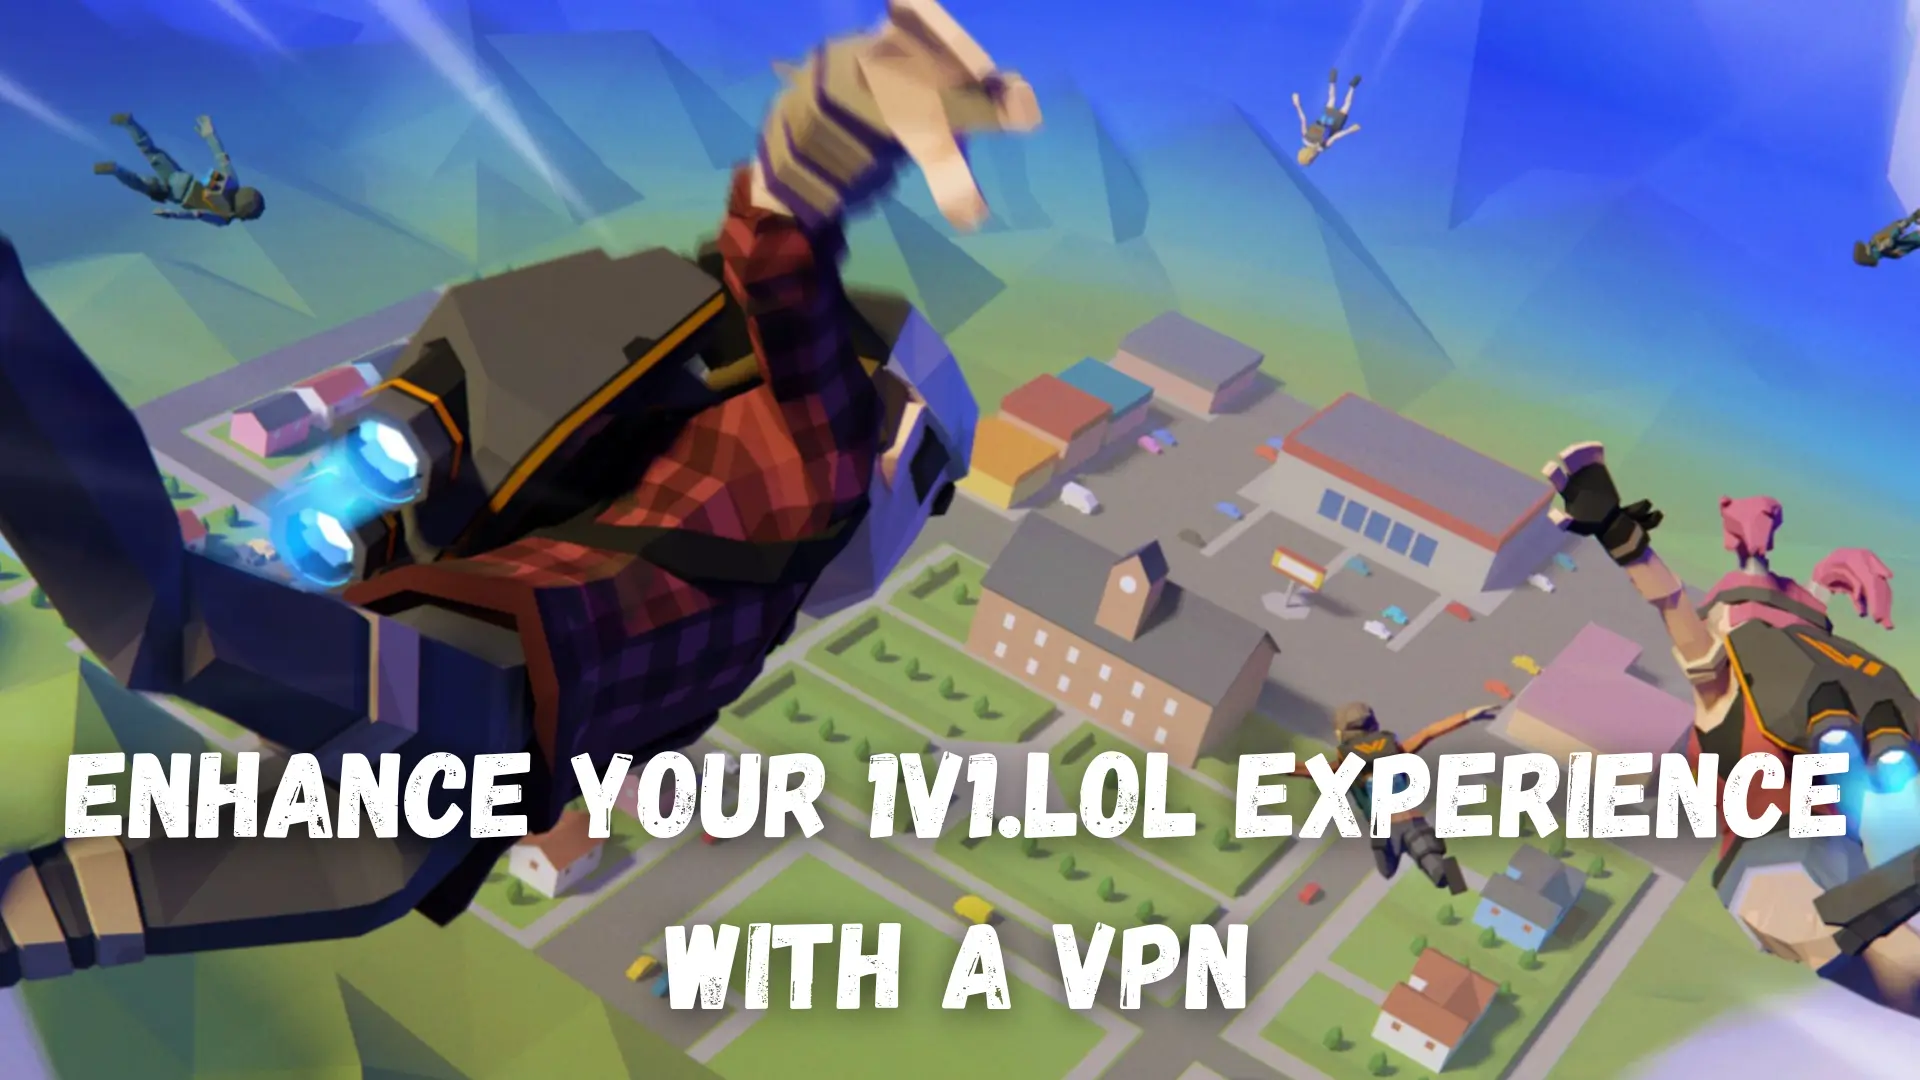 Enhance Your 1v1.lol Experience with a VPN